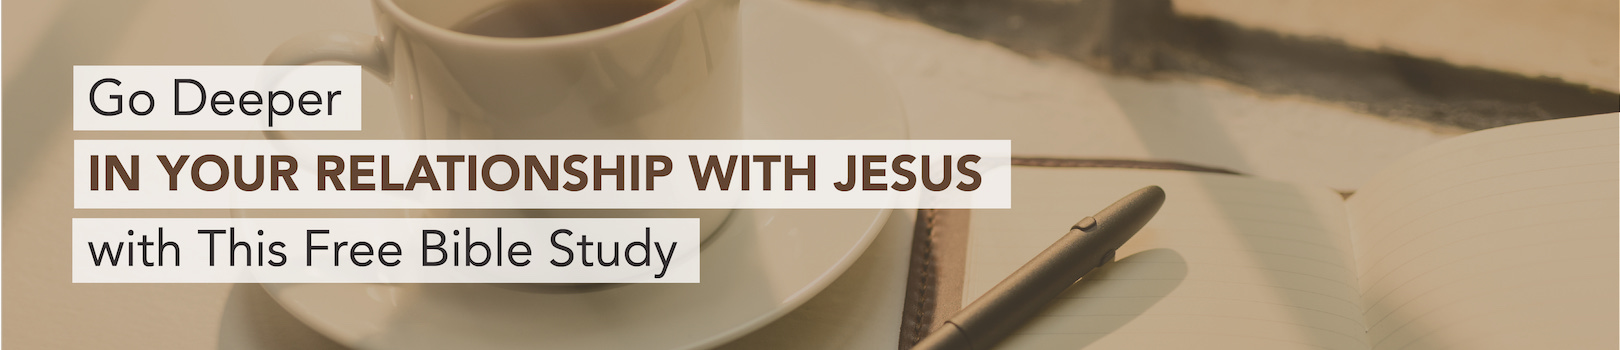 Go deeper in your relationship with Jesus with this free Bible study